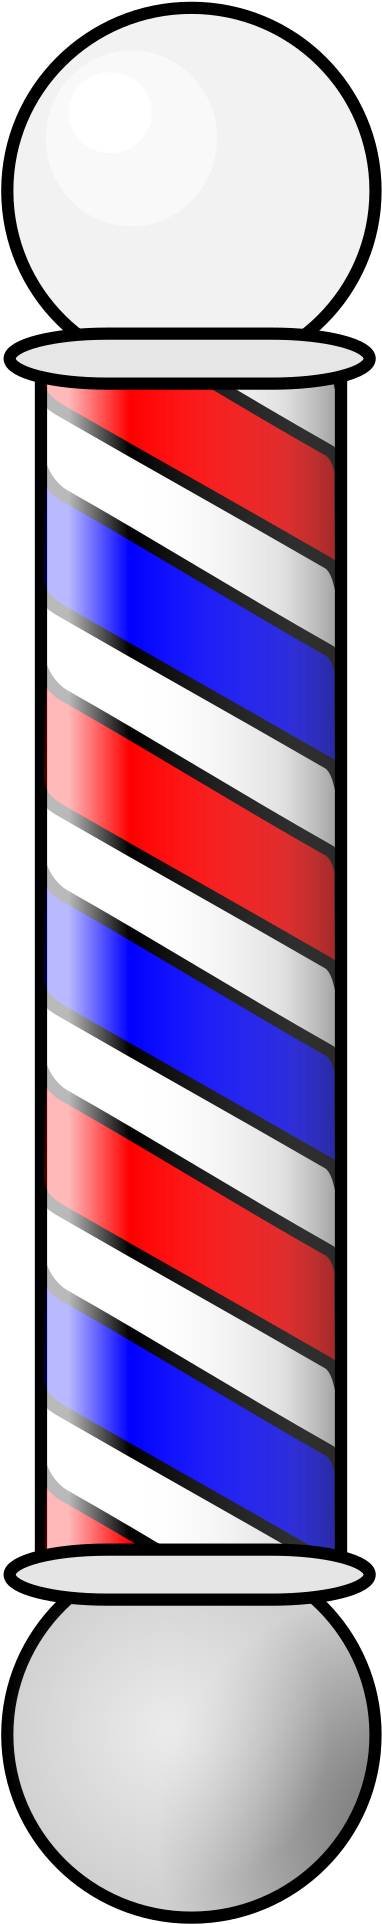 Barbershop Pole 2 Animation Free Barber Pole Clipart 800x2400 Png Clipart Download